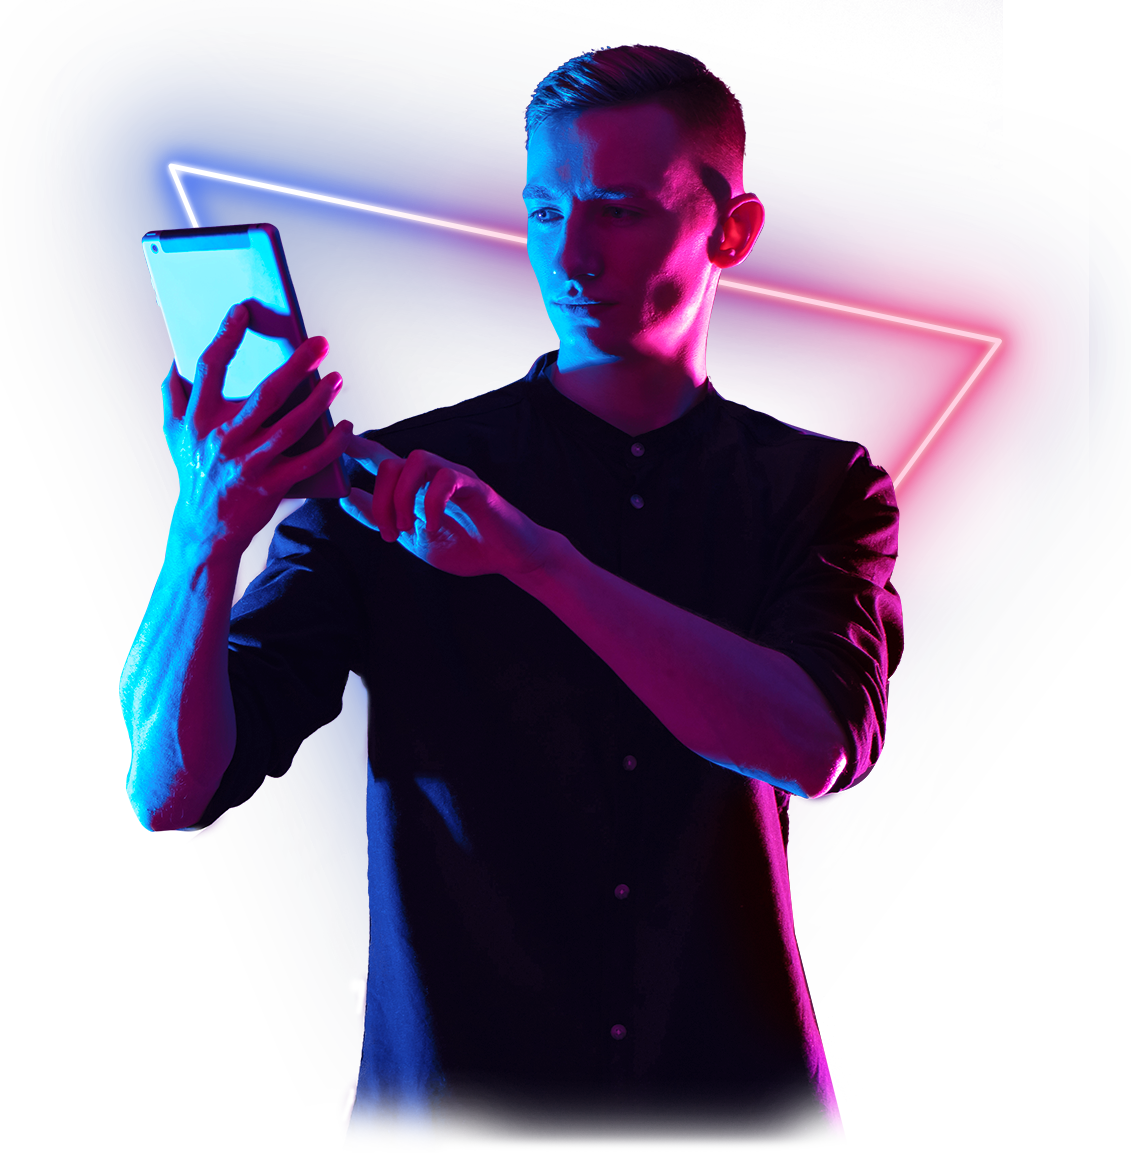 kevin neon triangle on phone 2022-01